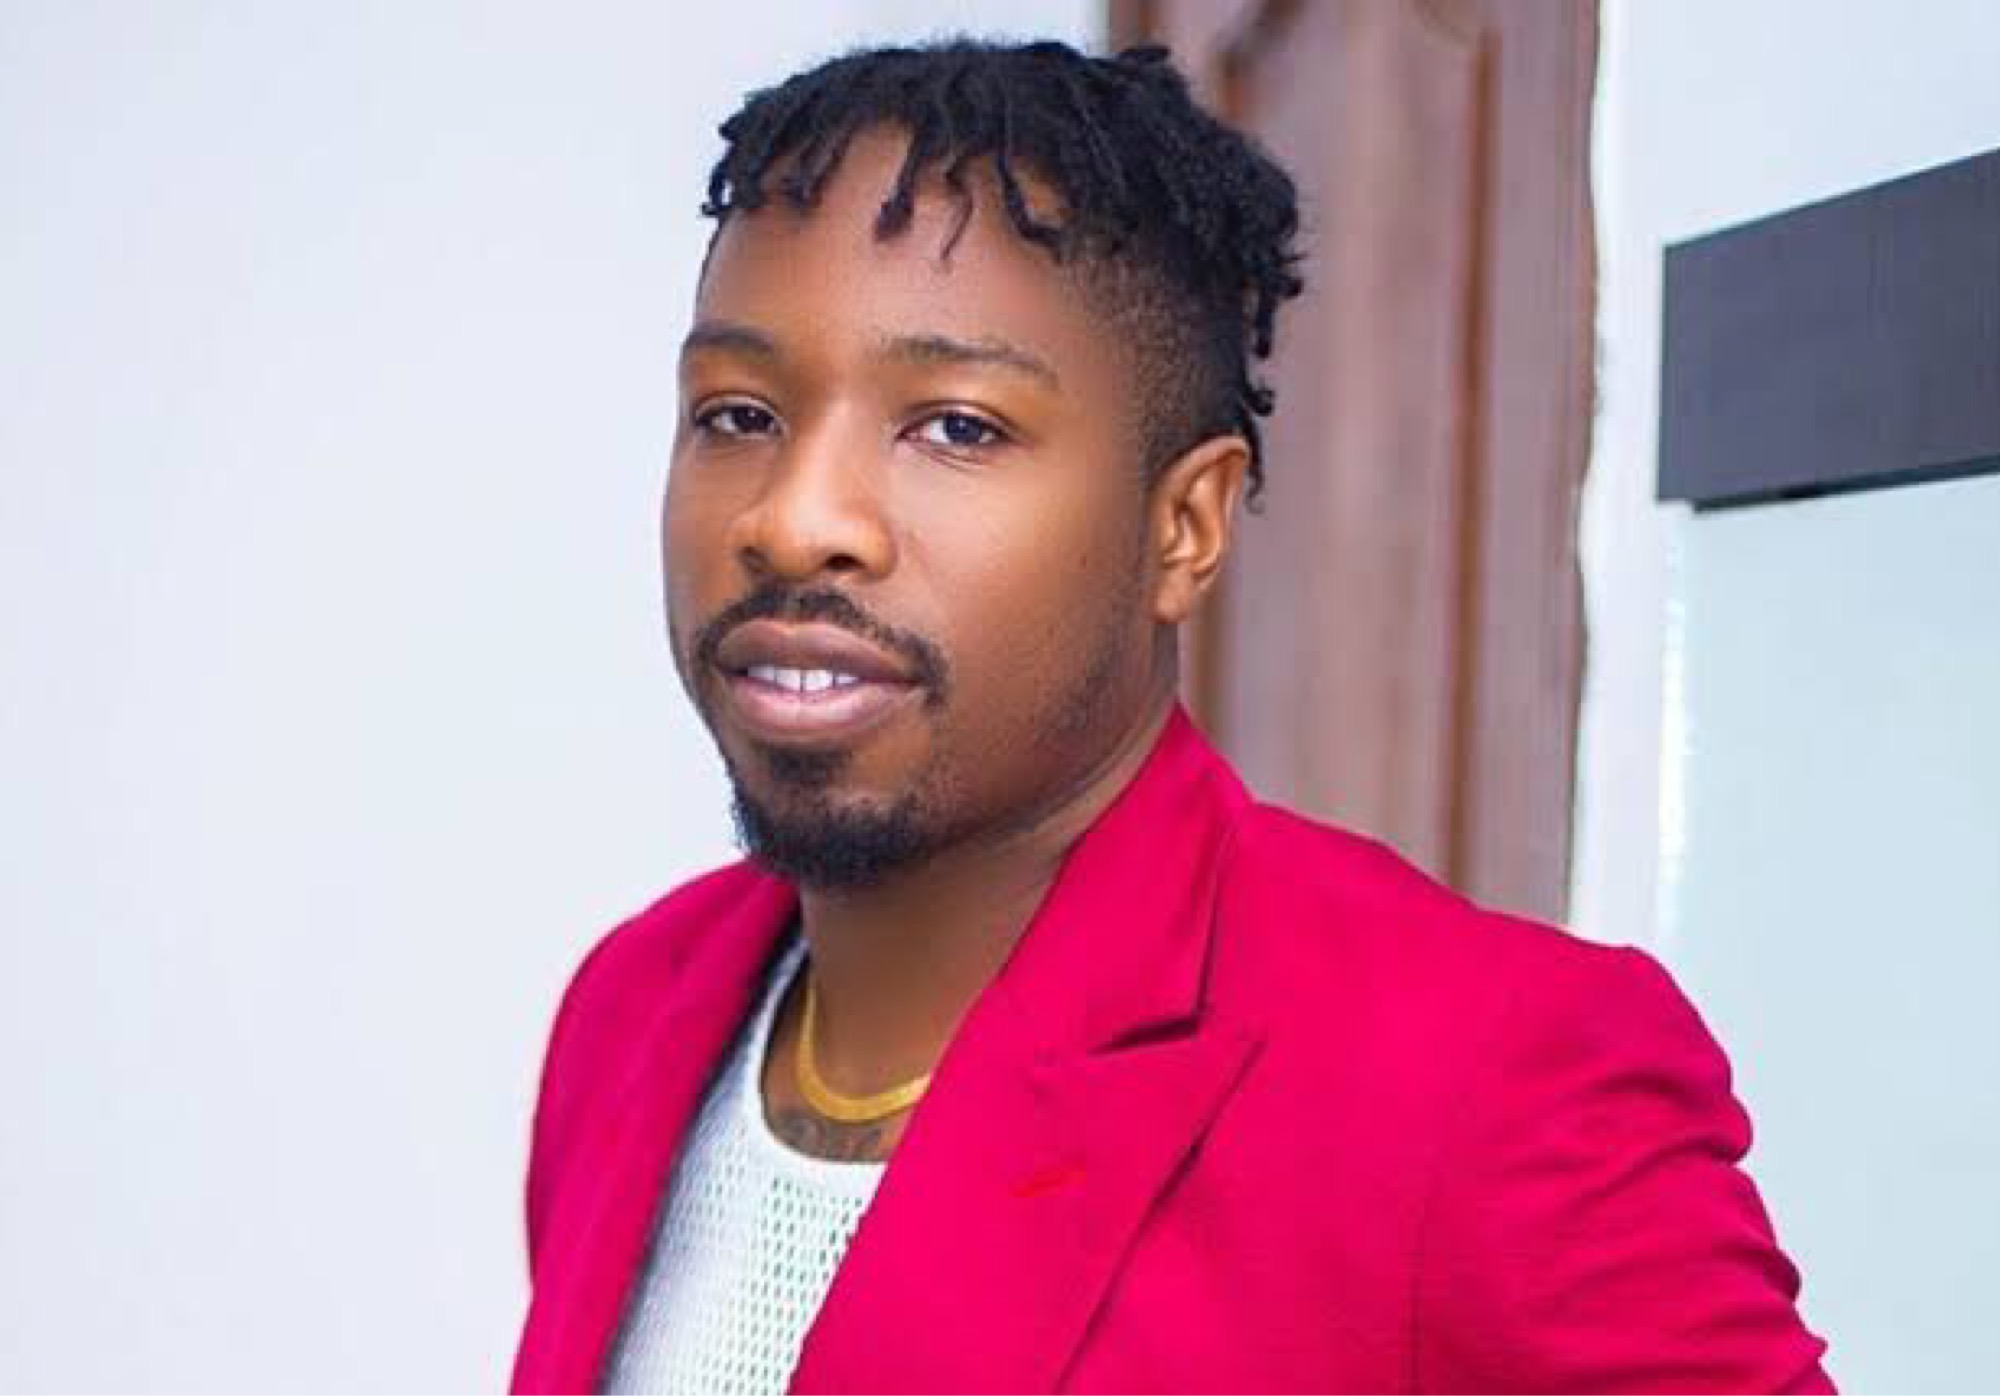 “We Need To Treat Our Women Better” - BBNaija’s Ike Speaks Out Against Gender-Based Violence